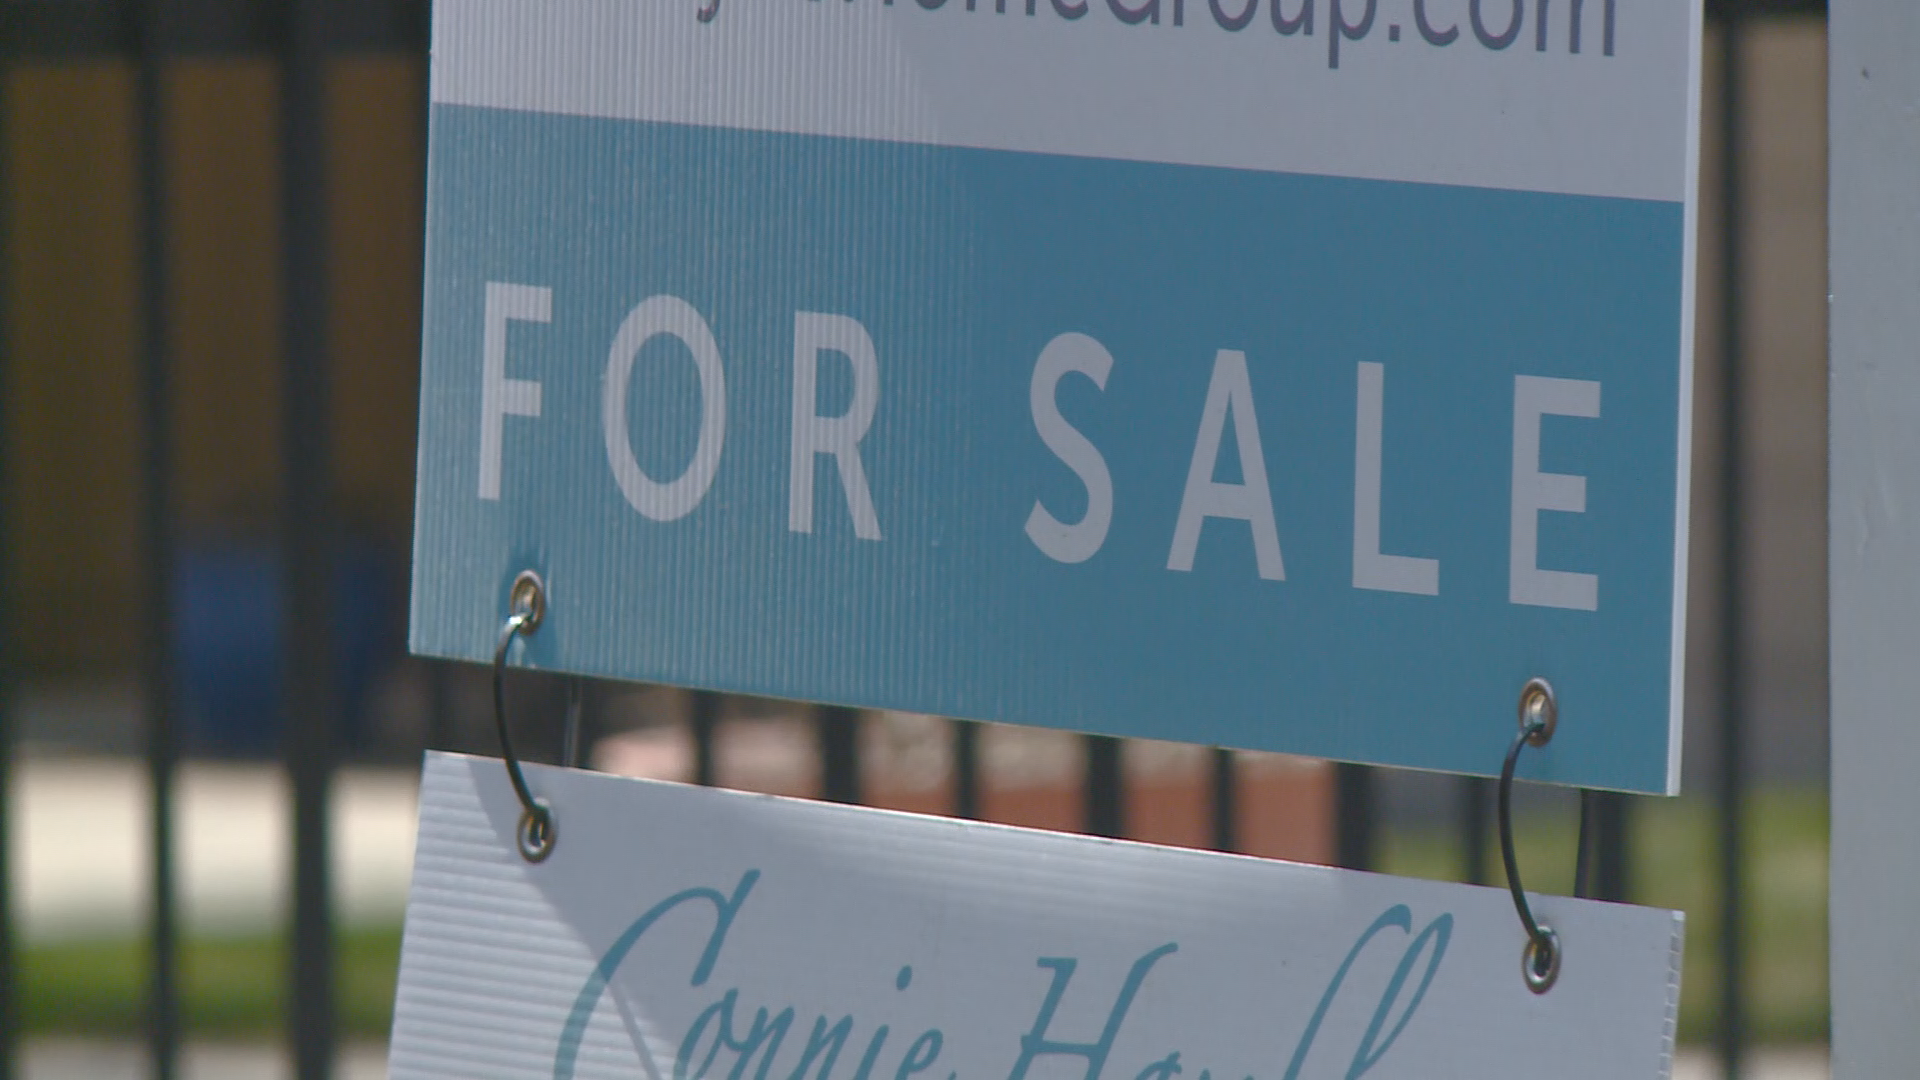 The Spokane Association of Realtors say the Spokane market is the most competitive they have ever seen, partly due to people moving from out of state.